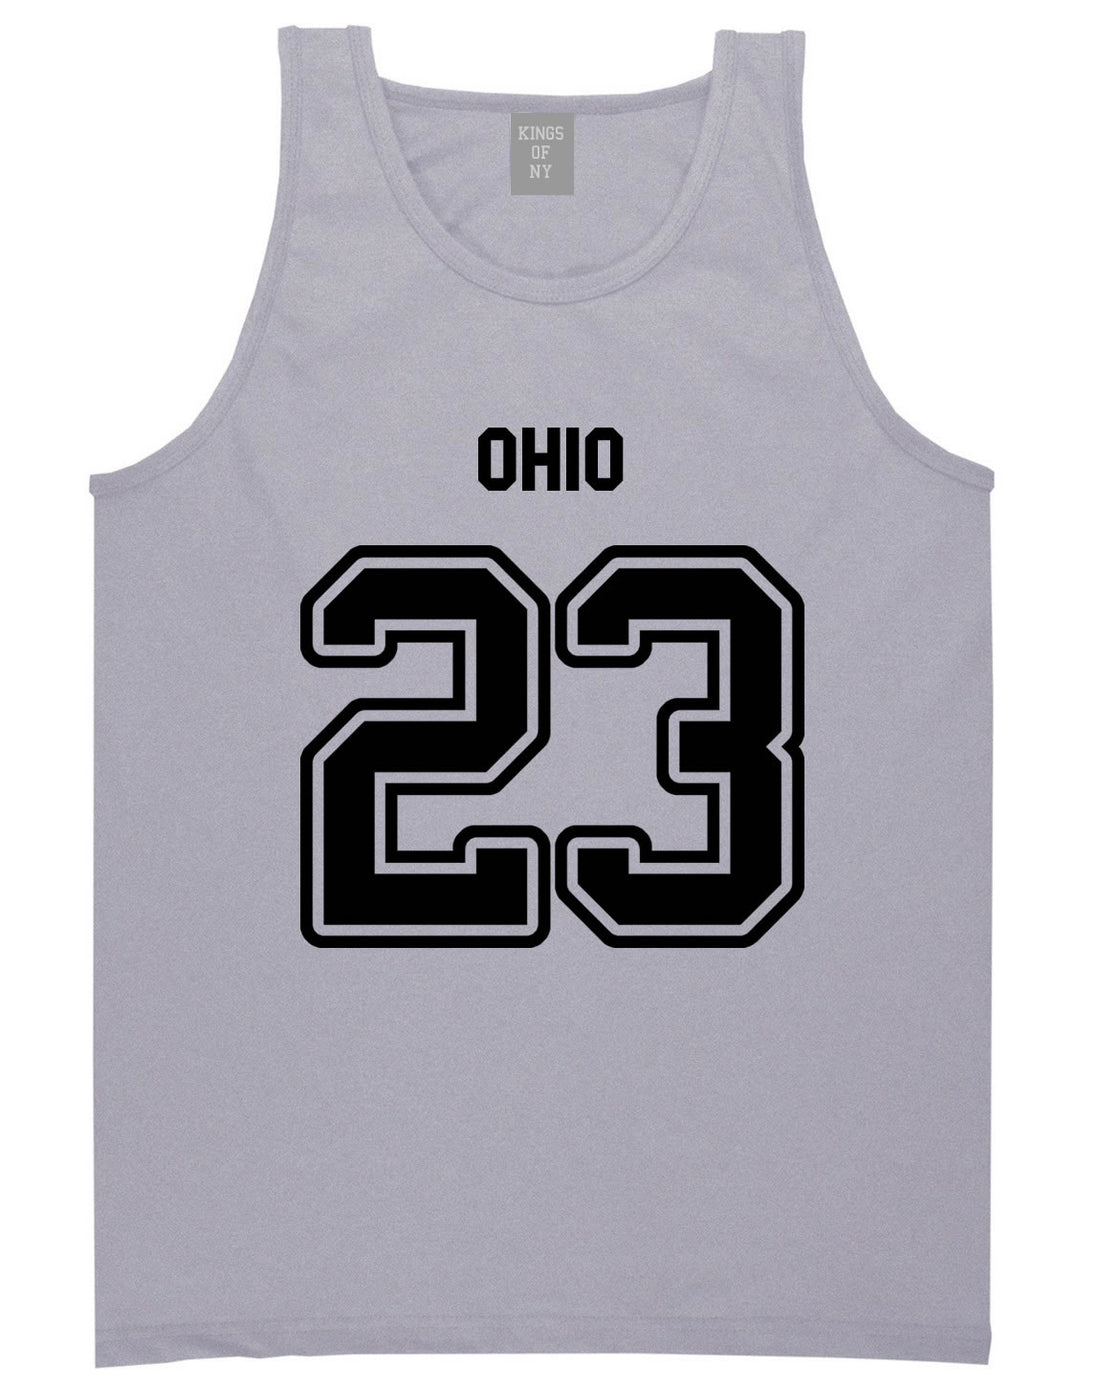 Sport Style Ohio 23 Team State Jersey Mens Tank Top By Kings Of NY